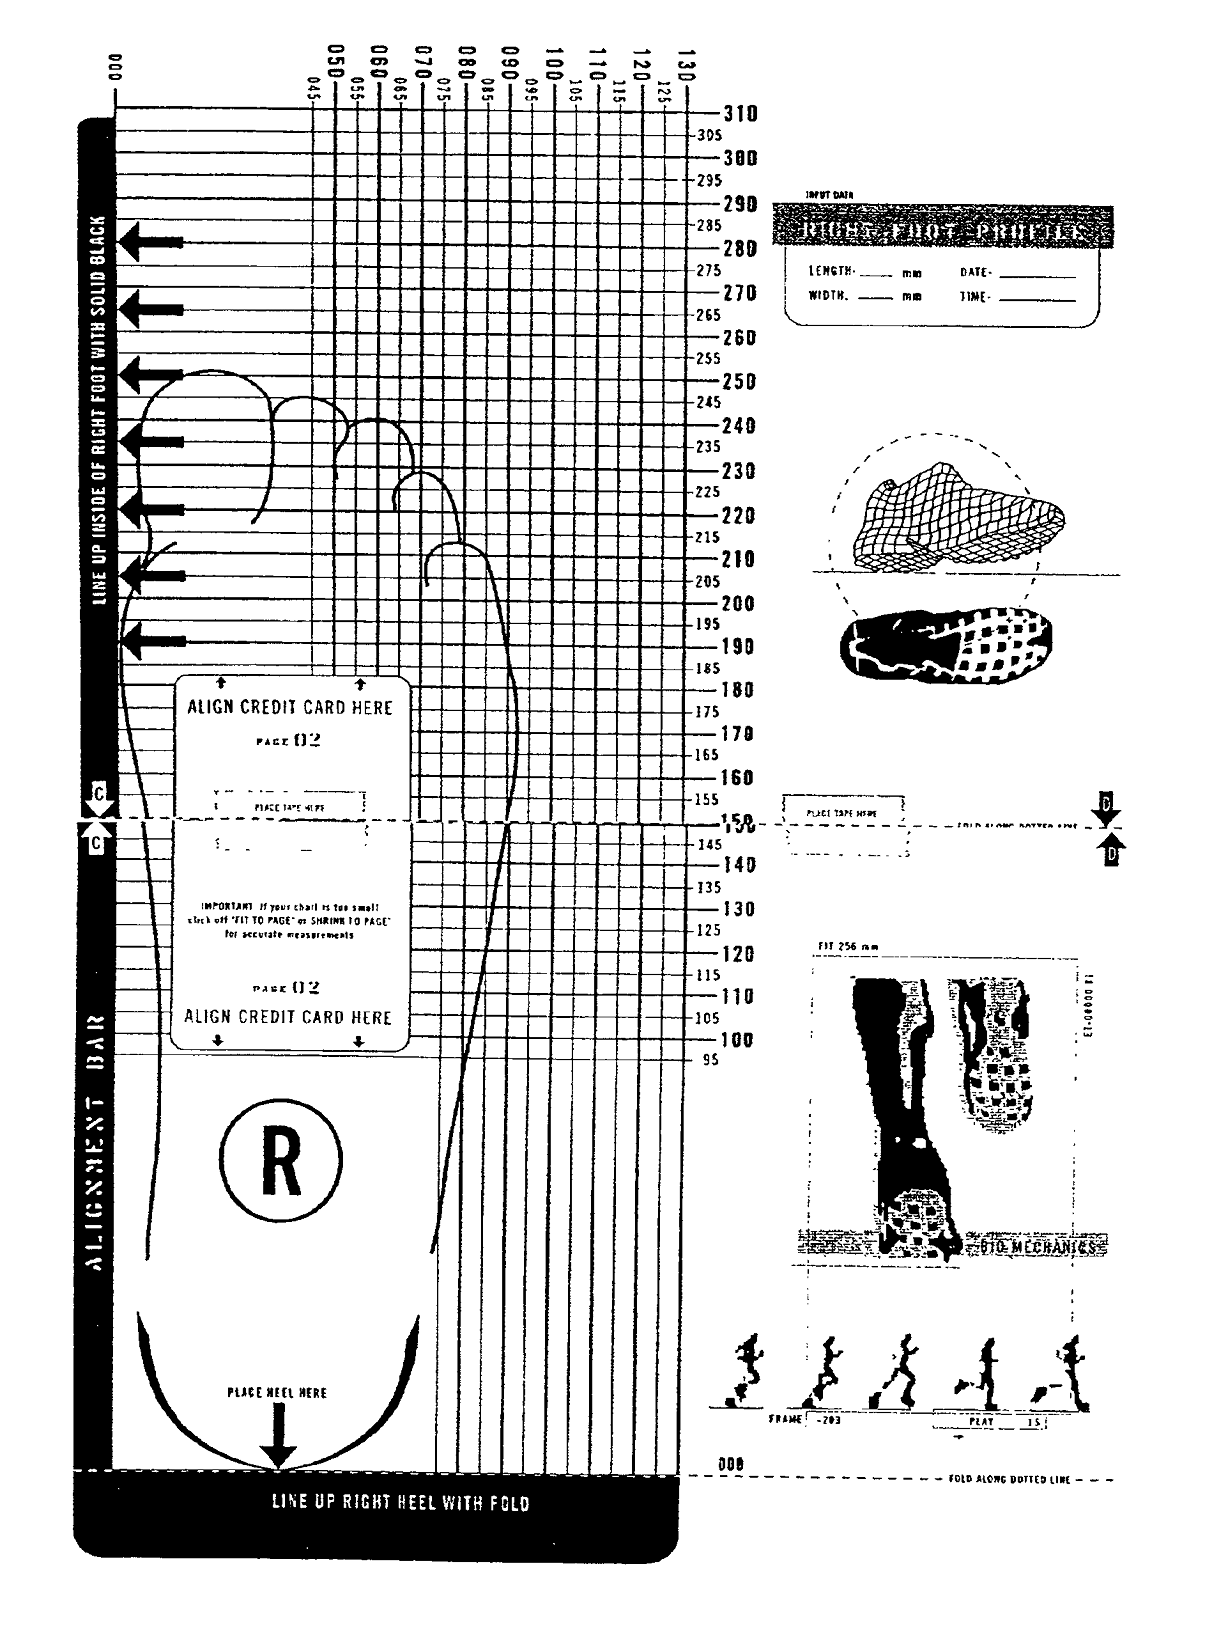 syracuse-science-museum-printable-shoe-size-chart-women-s